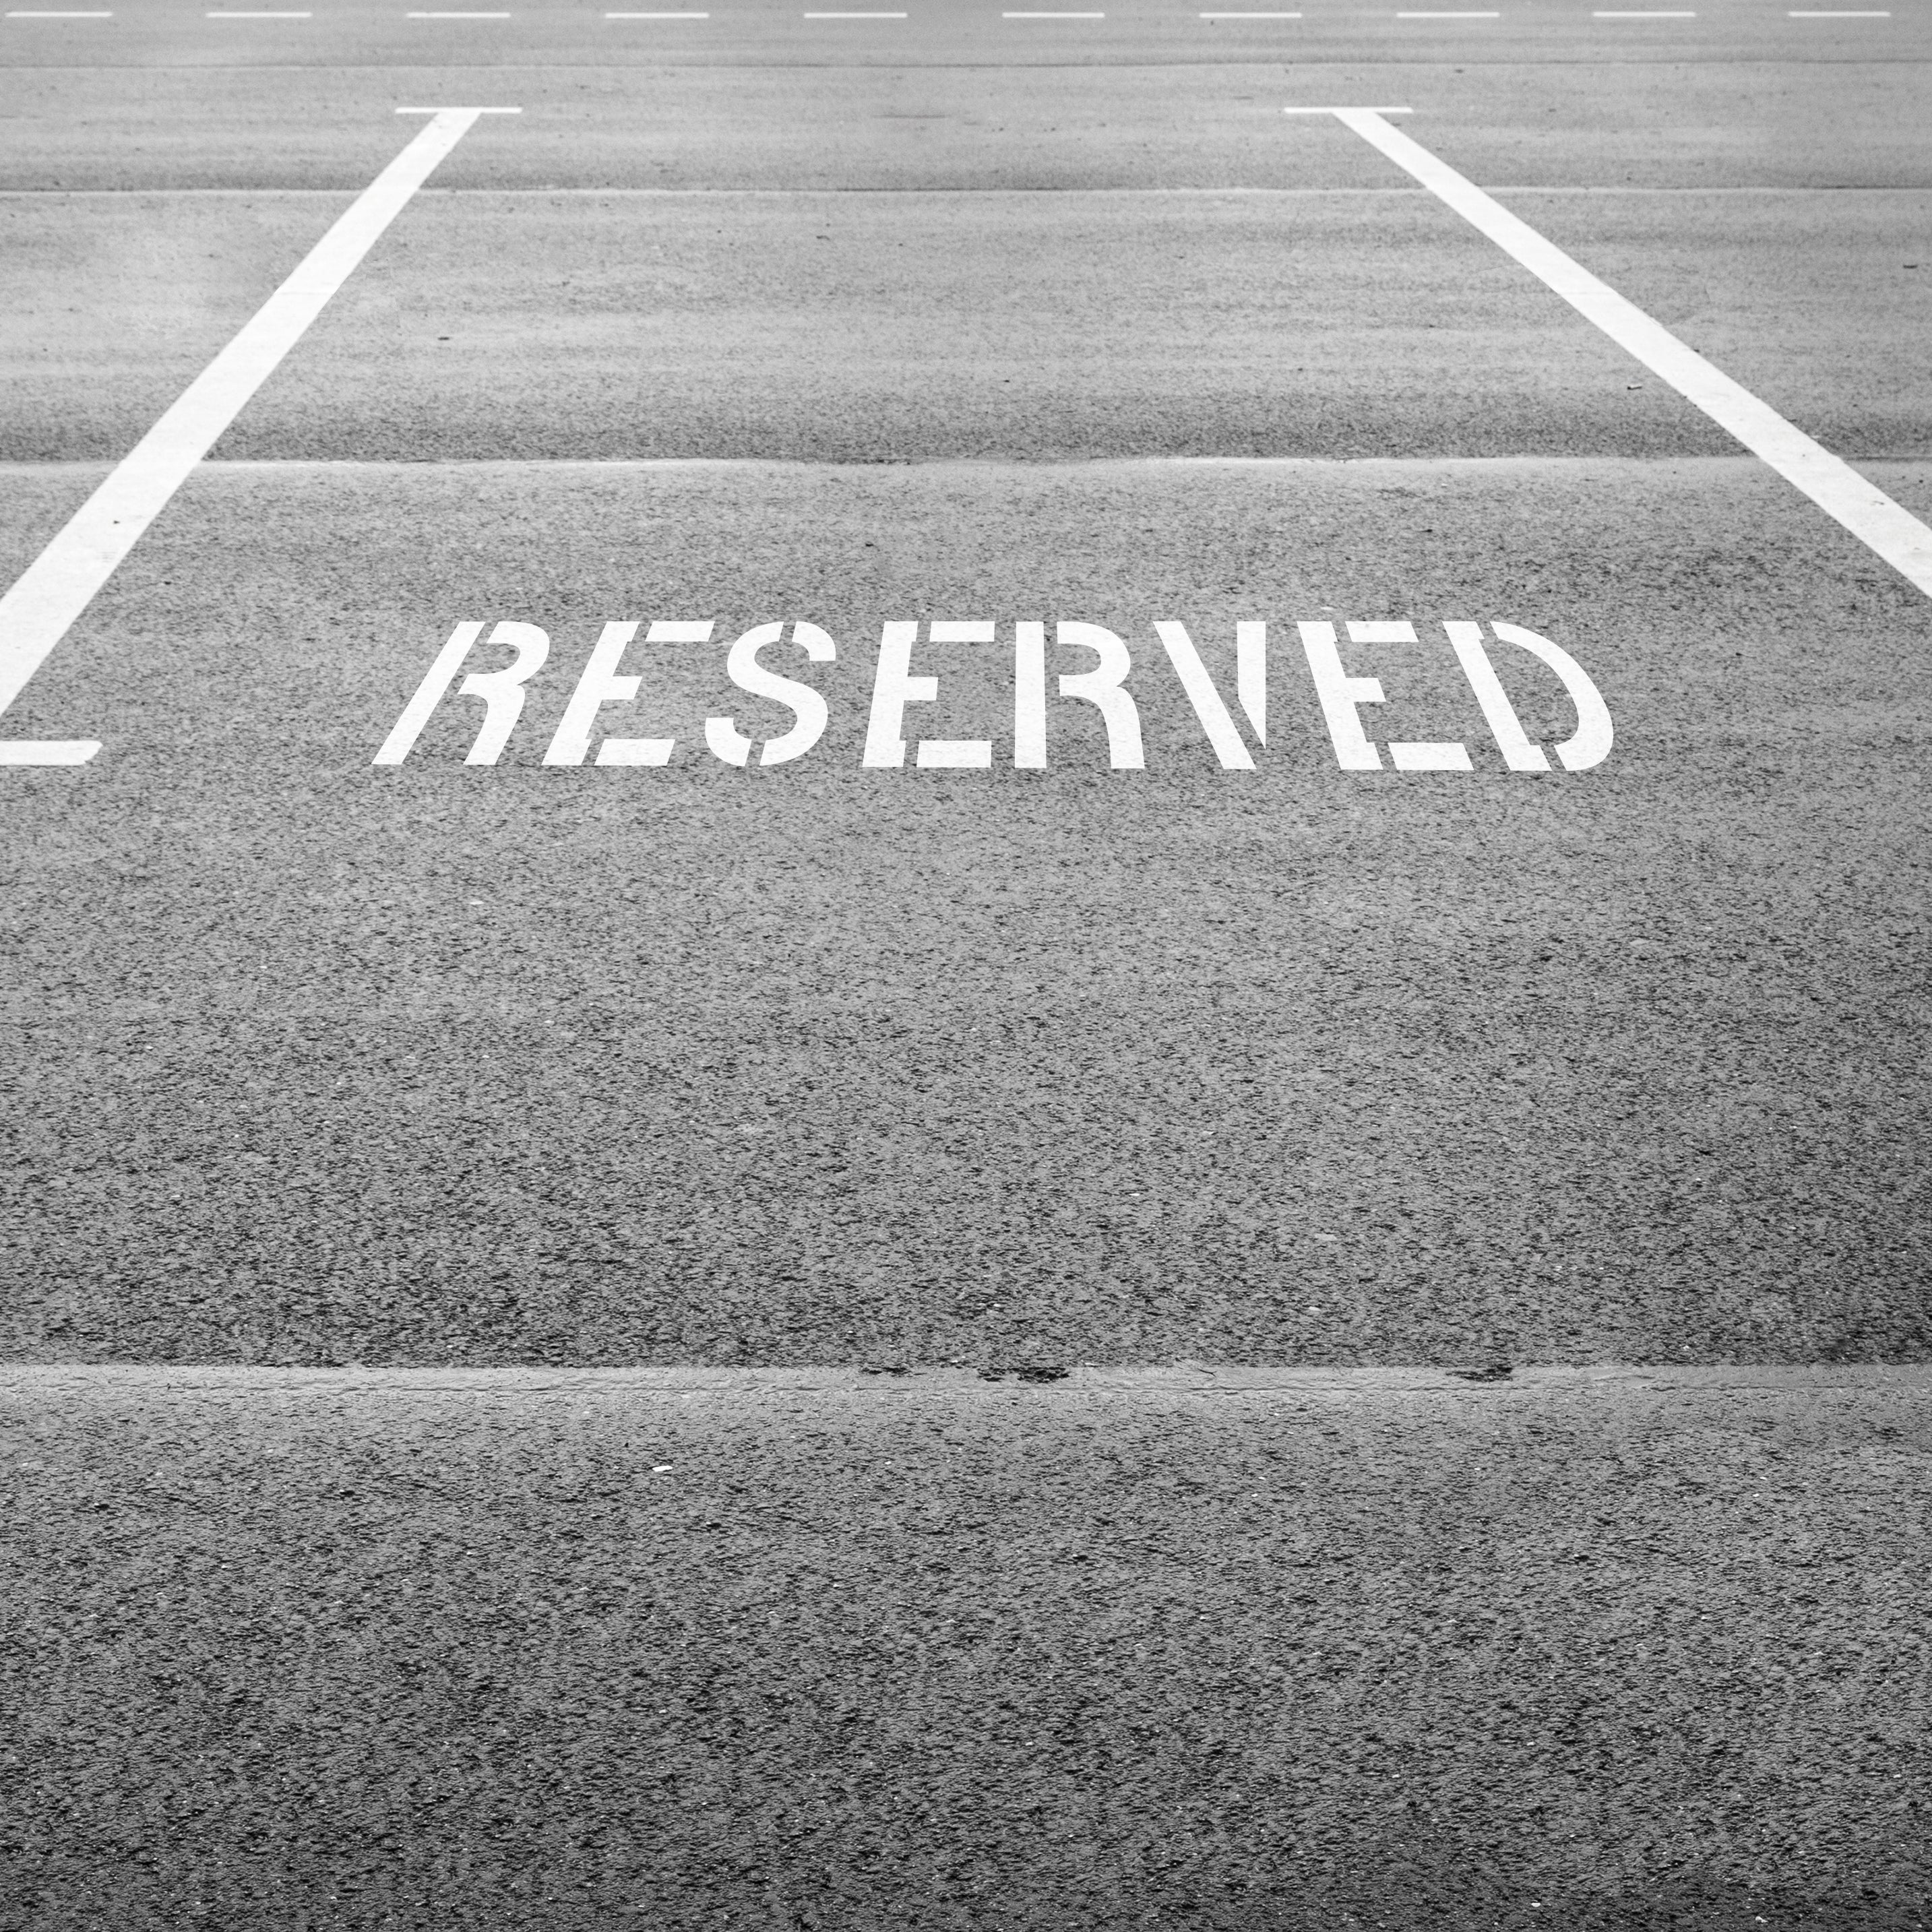 Reserved Parking Stencil Questions & Answers